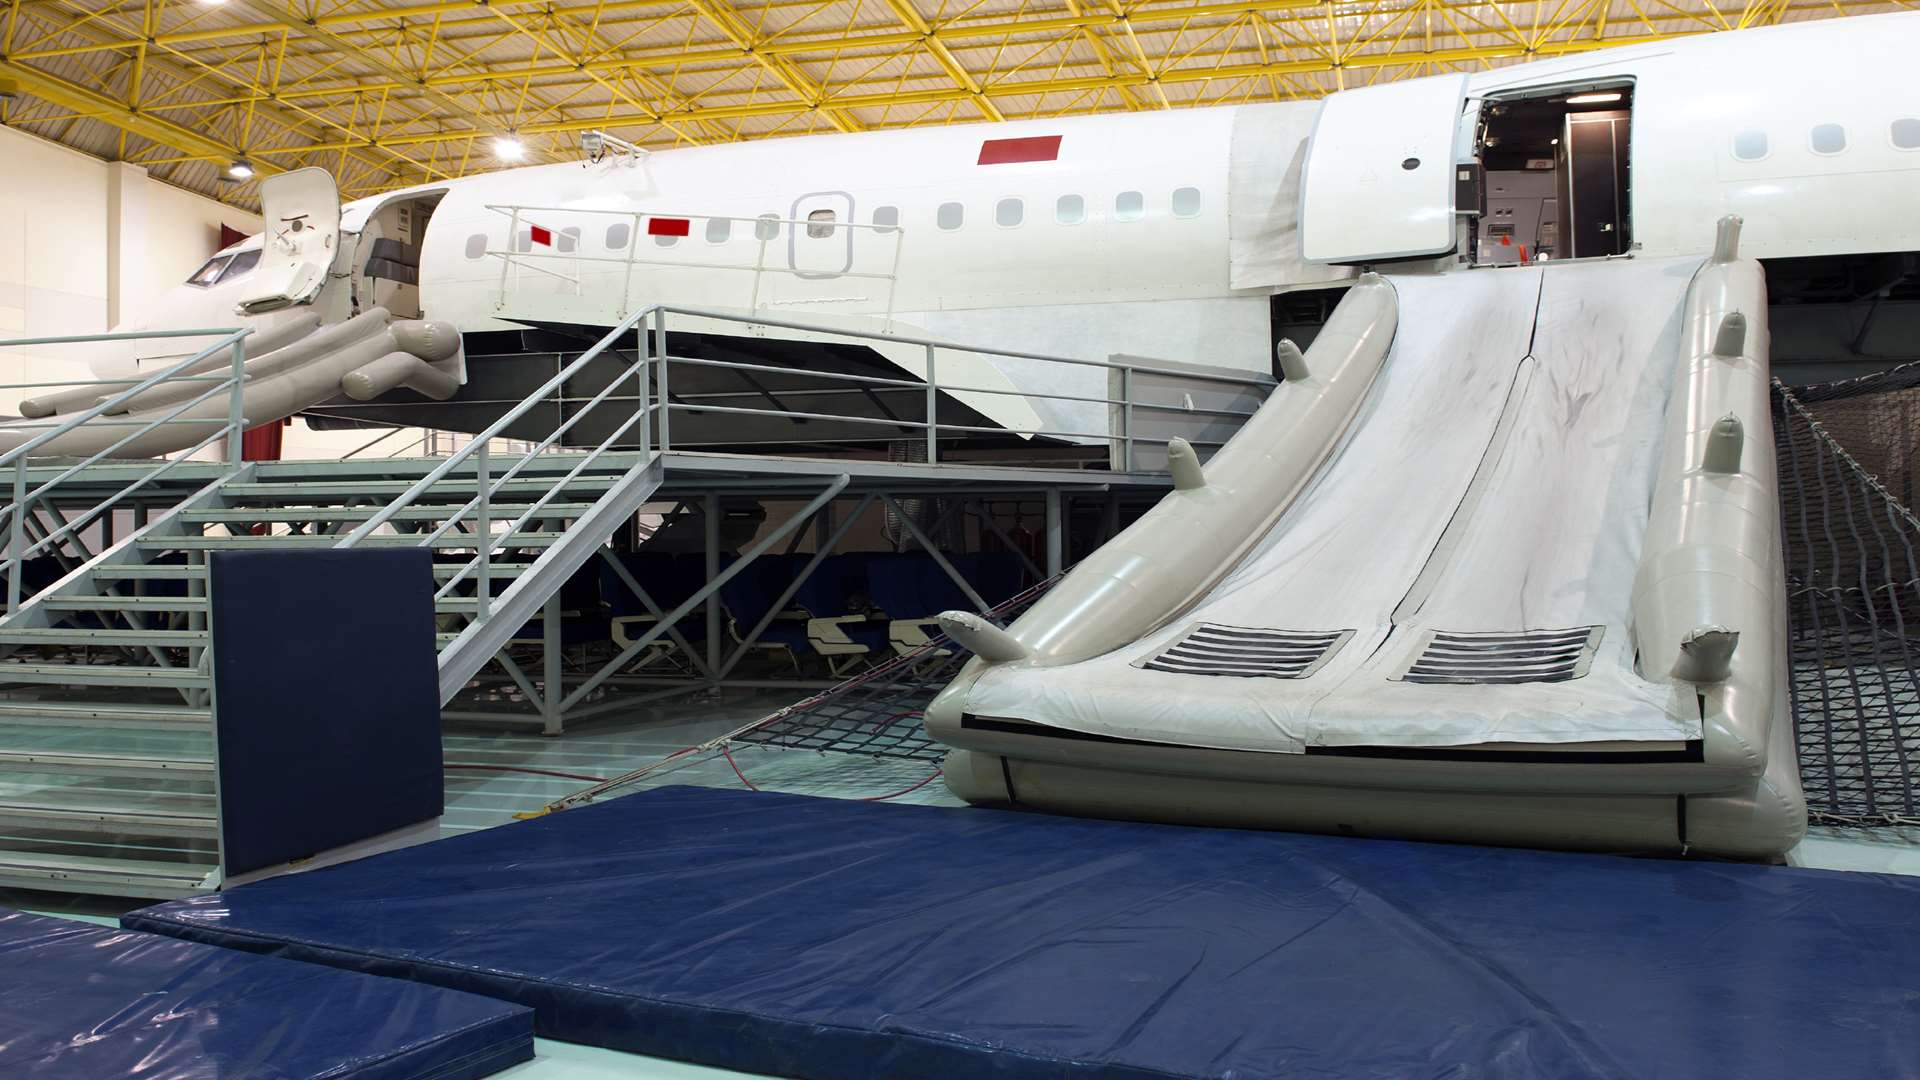 A slide, similar to this, fell off of the plane. Picture: File picture